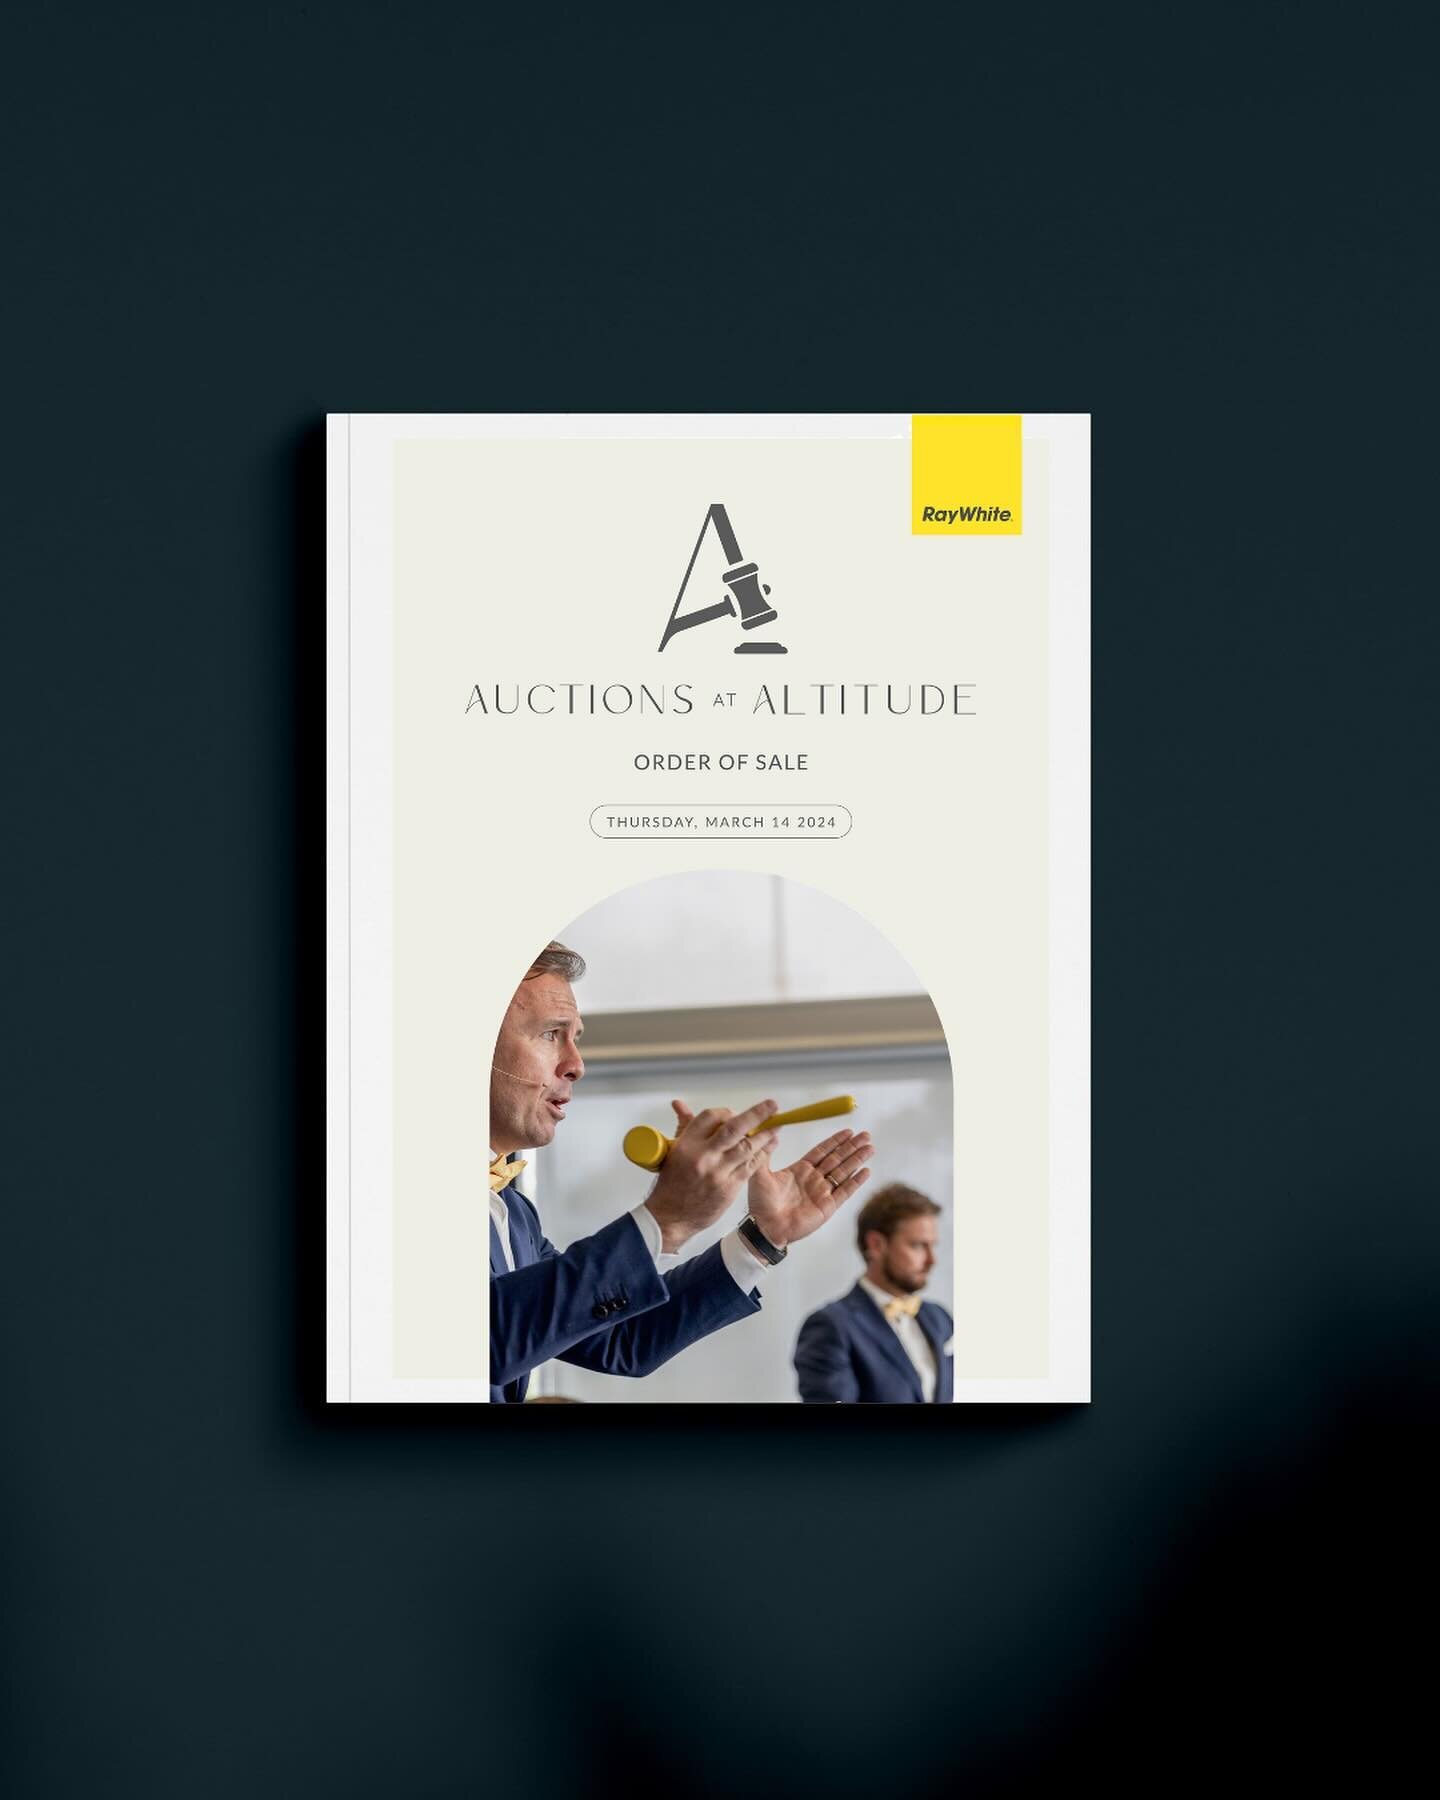 We are always proud to partner with Ray White Maroochydore, an agency that is excited to push the envelope and reach new heights in property marketing. Experience unparalleled excellence with Auctions at Altitude, spearheaded by the renowned Dan Sowd